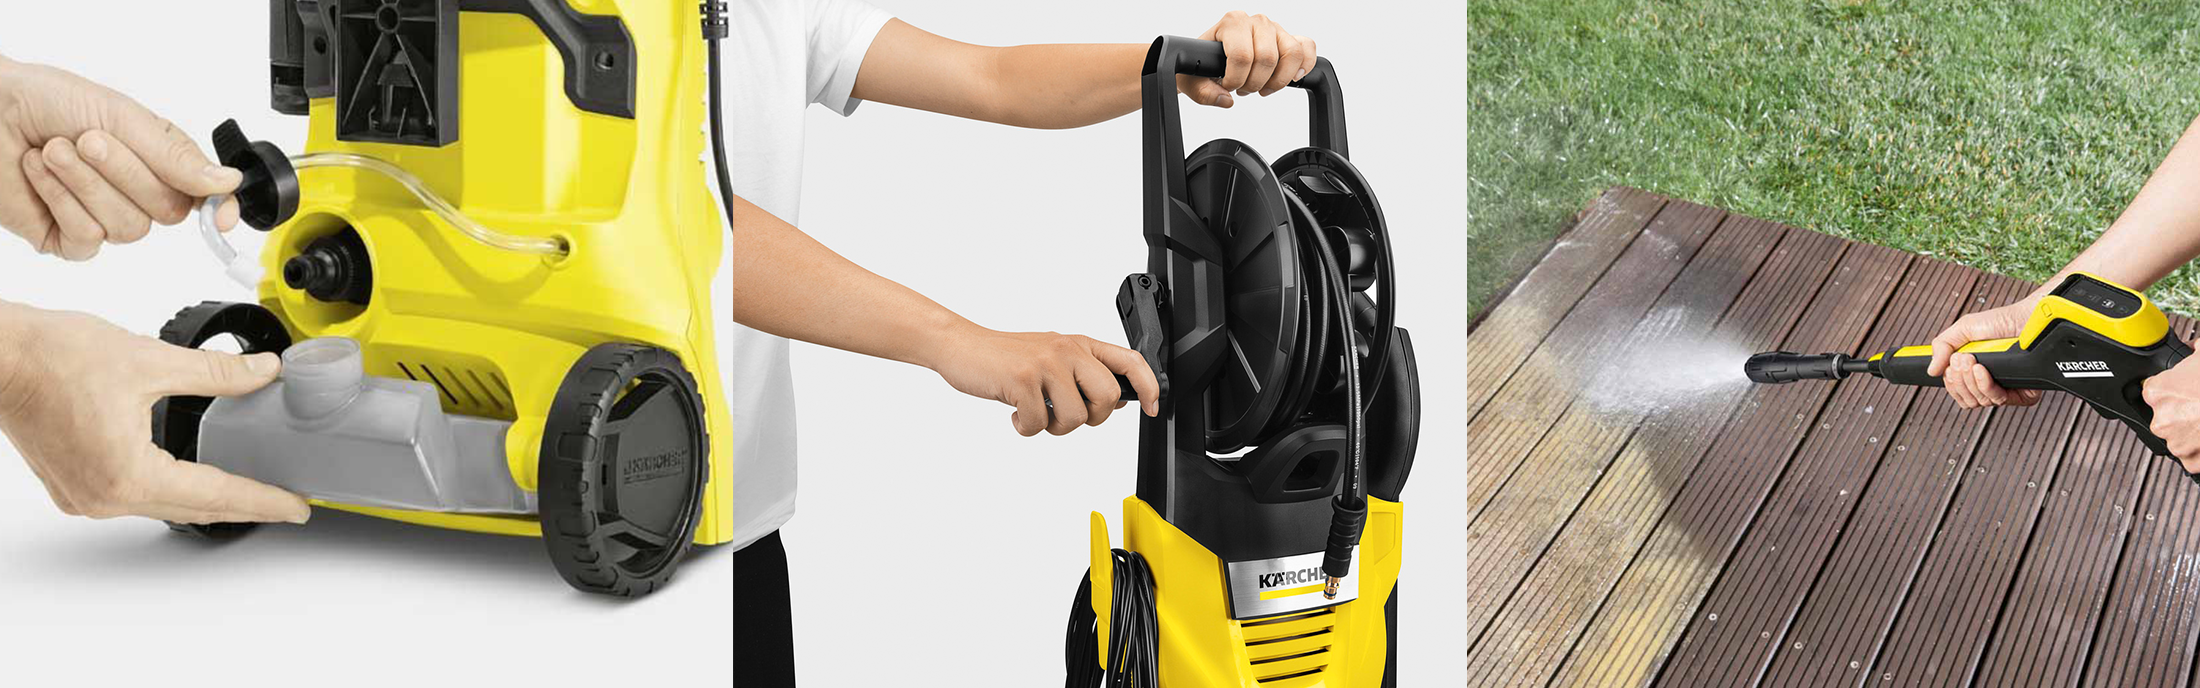 What Is The Difference Between Karcher Models